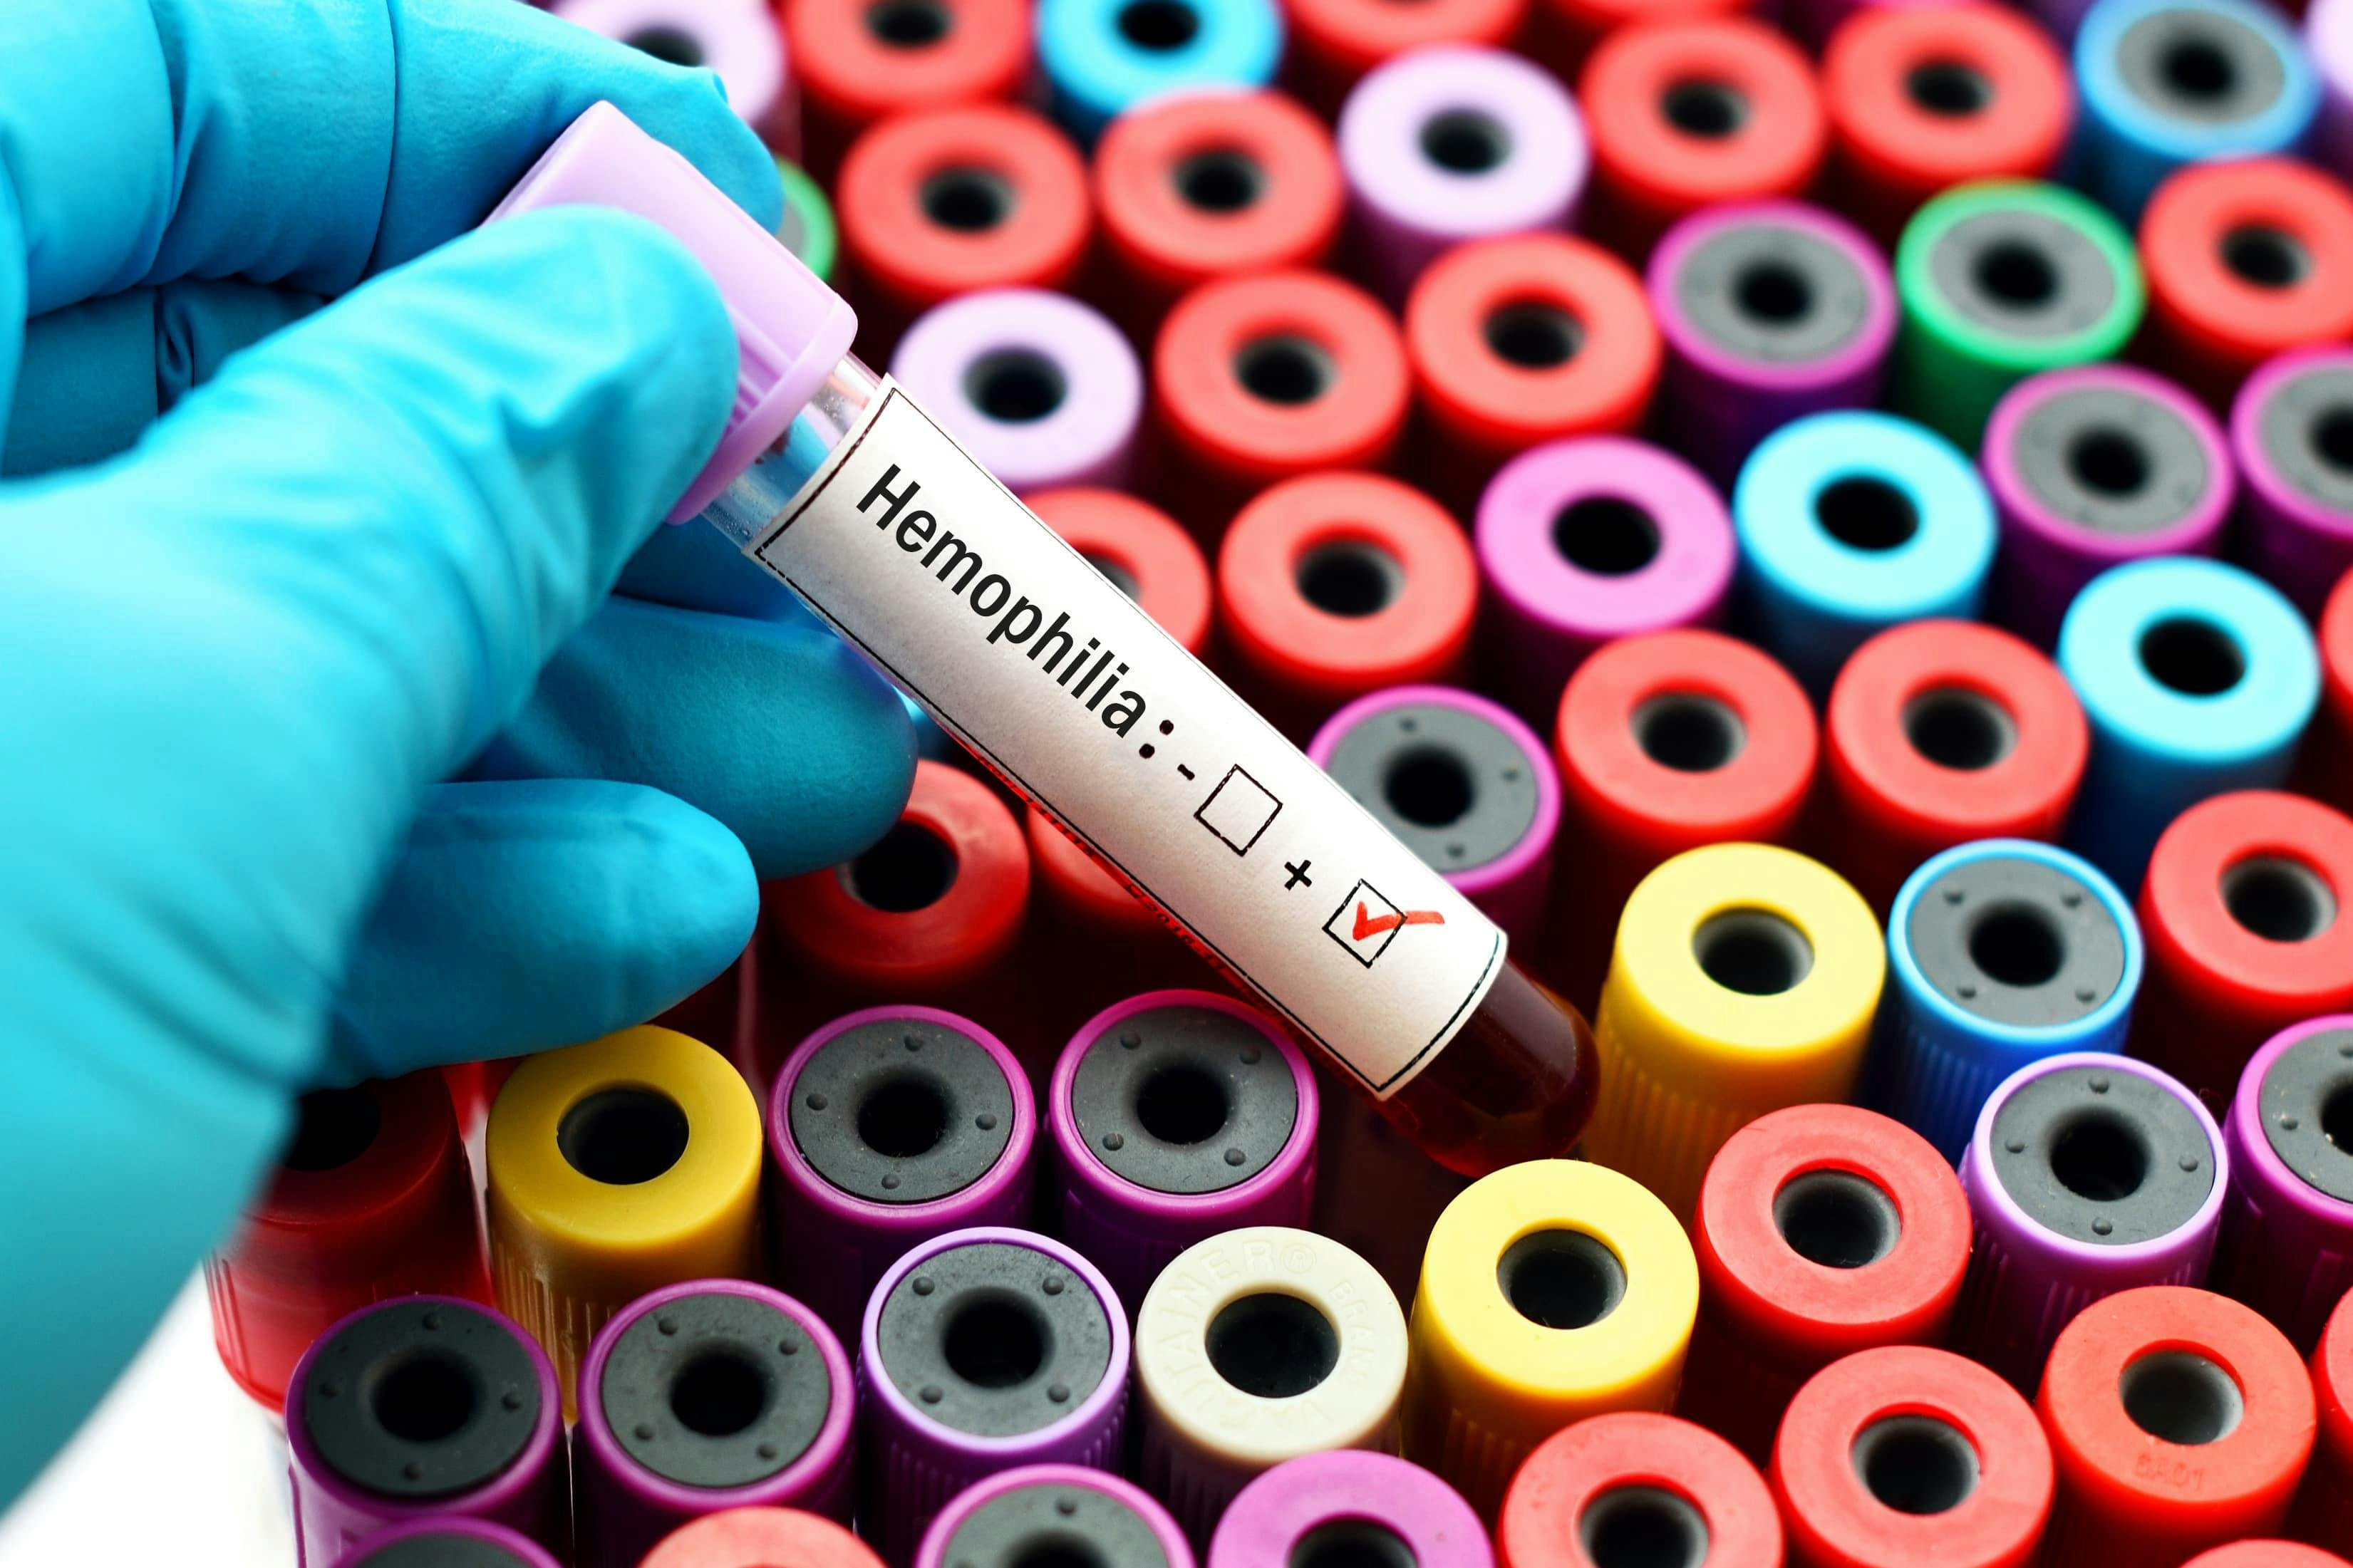 picture of tubes of blood labels with the word hemeophilia